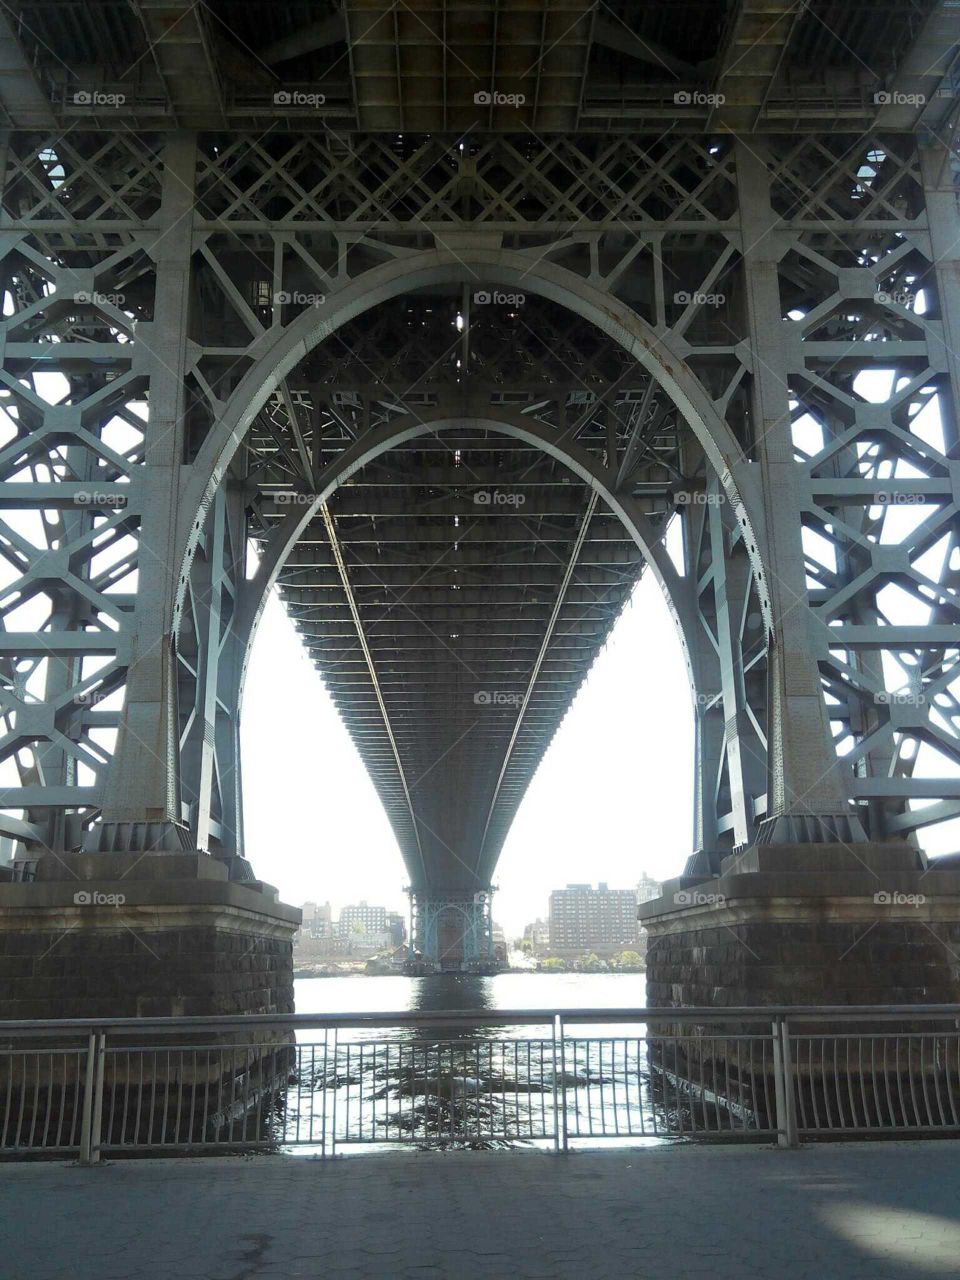 Under the Triboro Bridge as seen from Wards Island